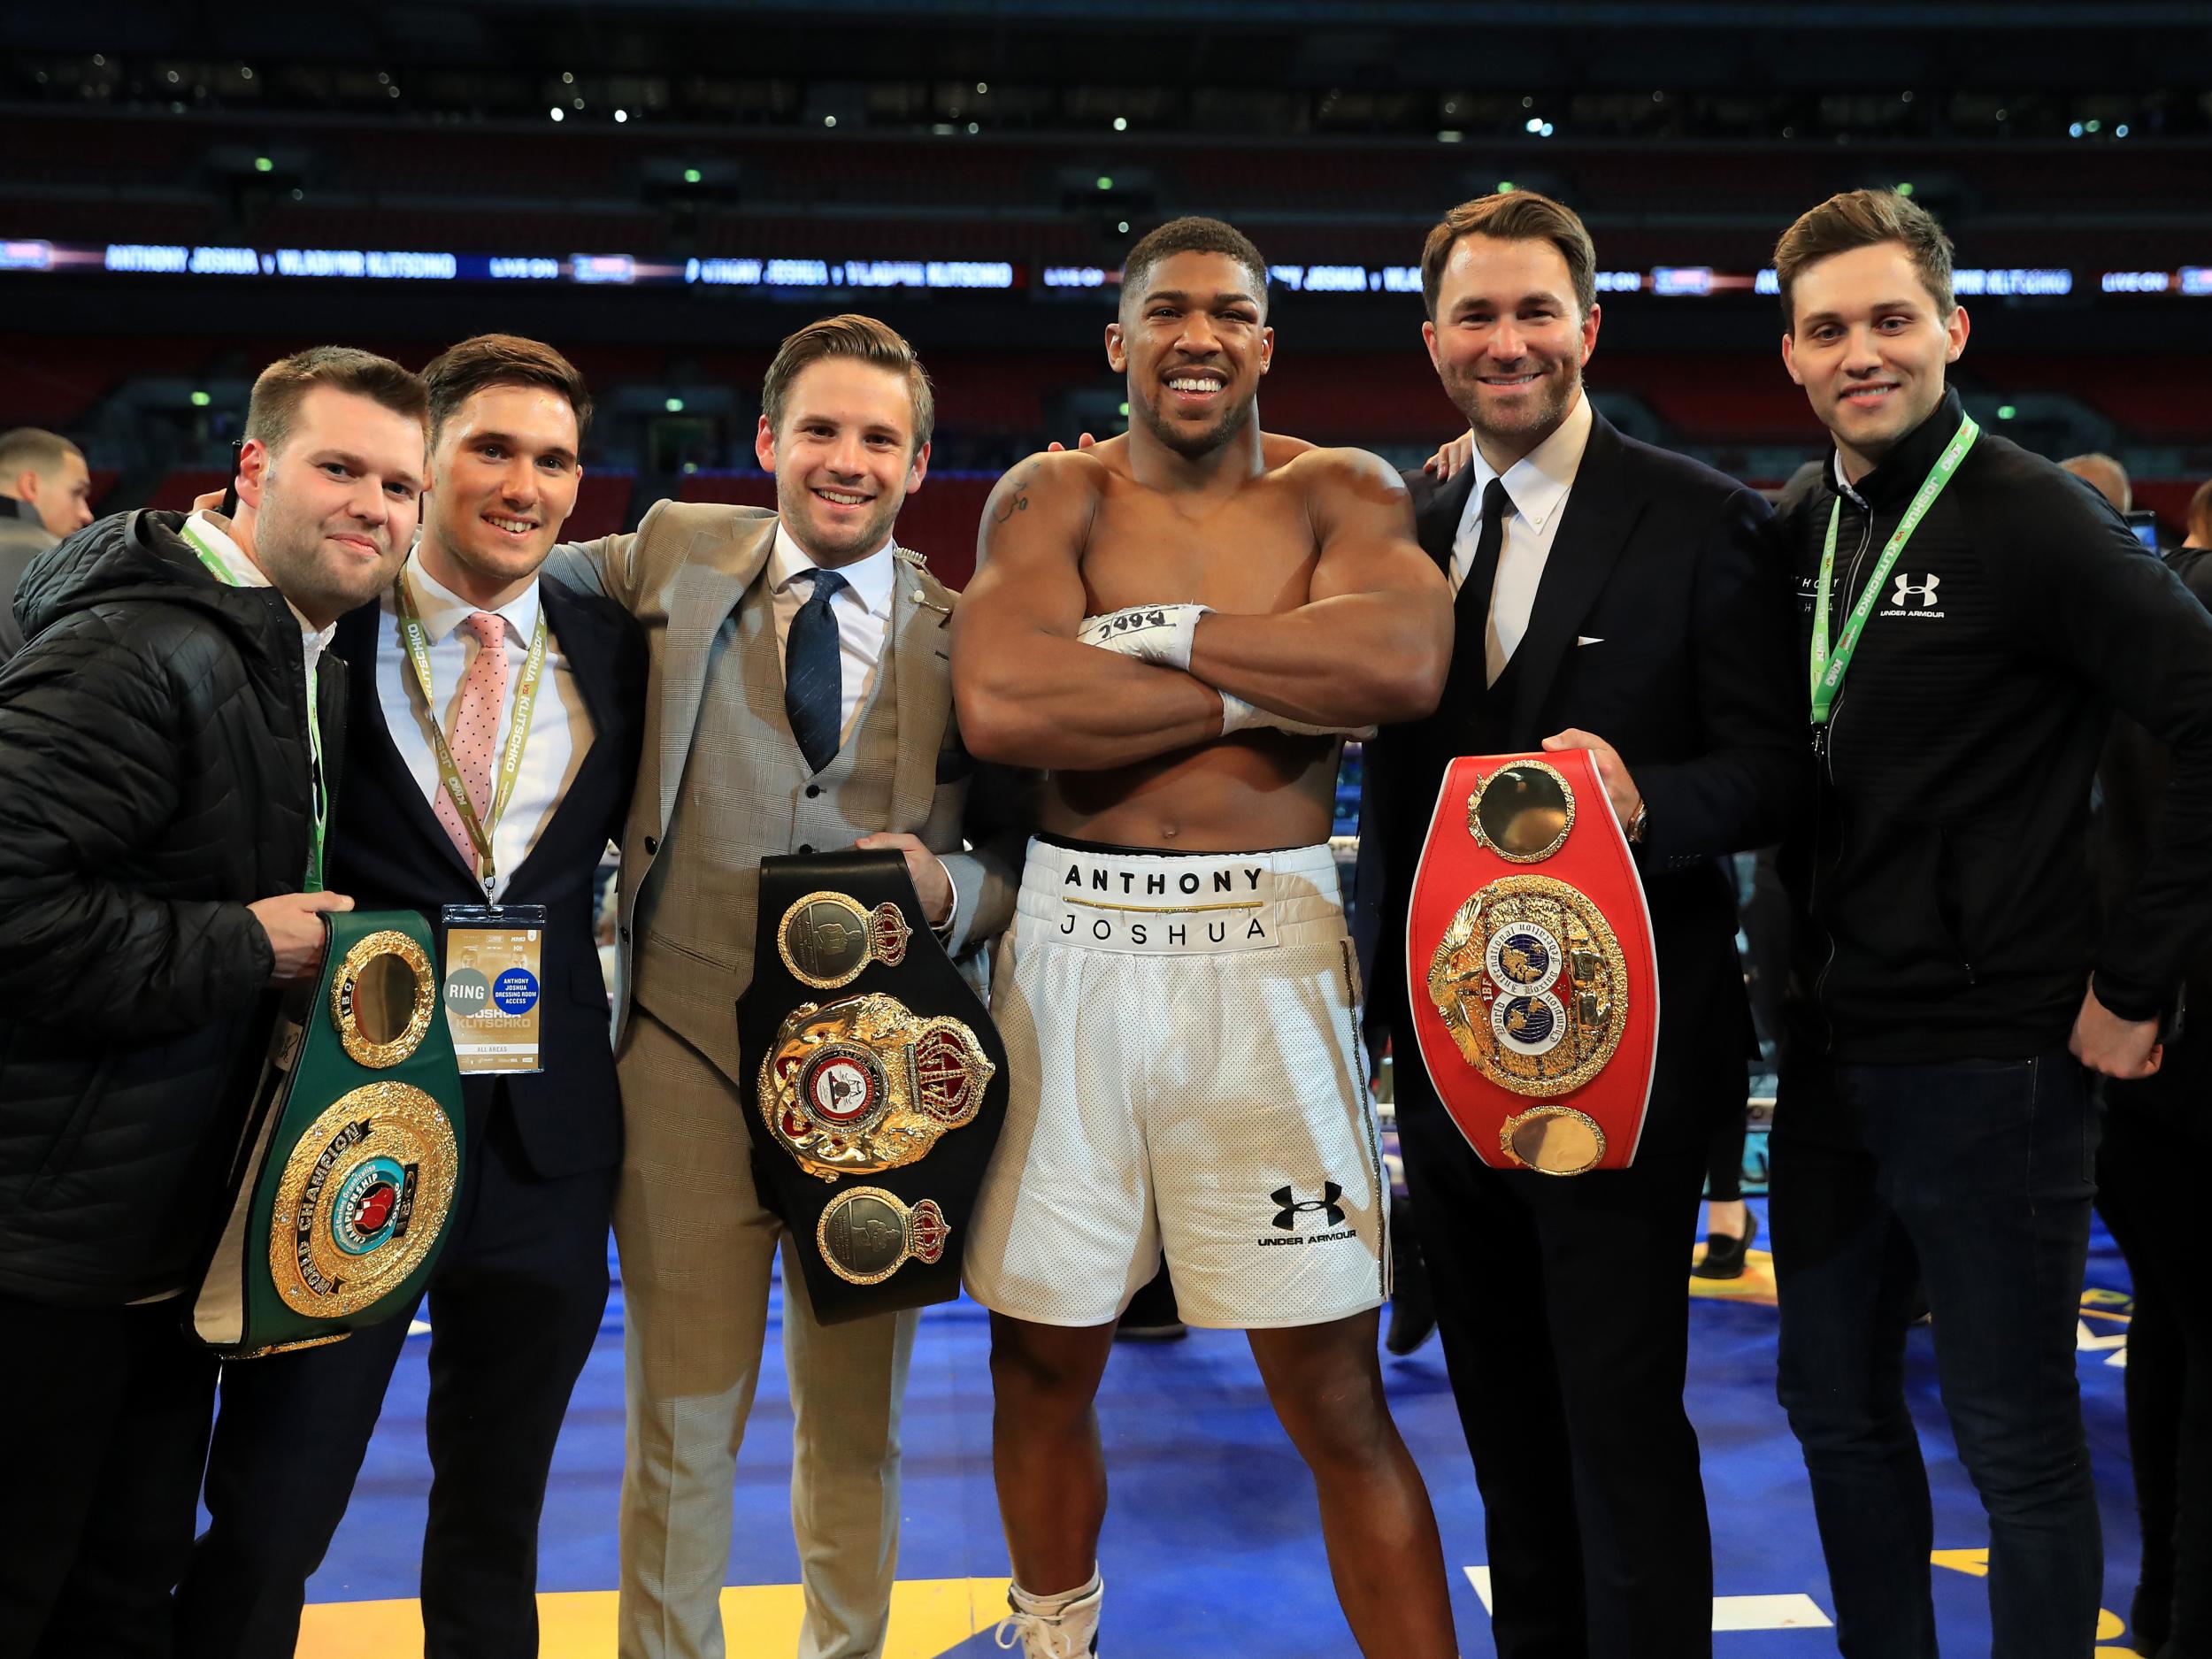 Joshua may have to make a mandatory defence of his IBF title